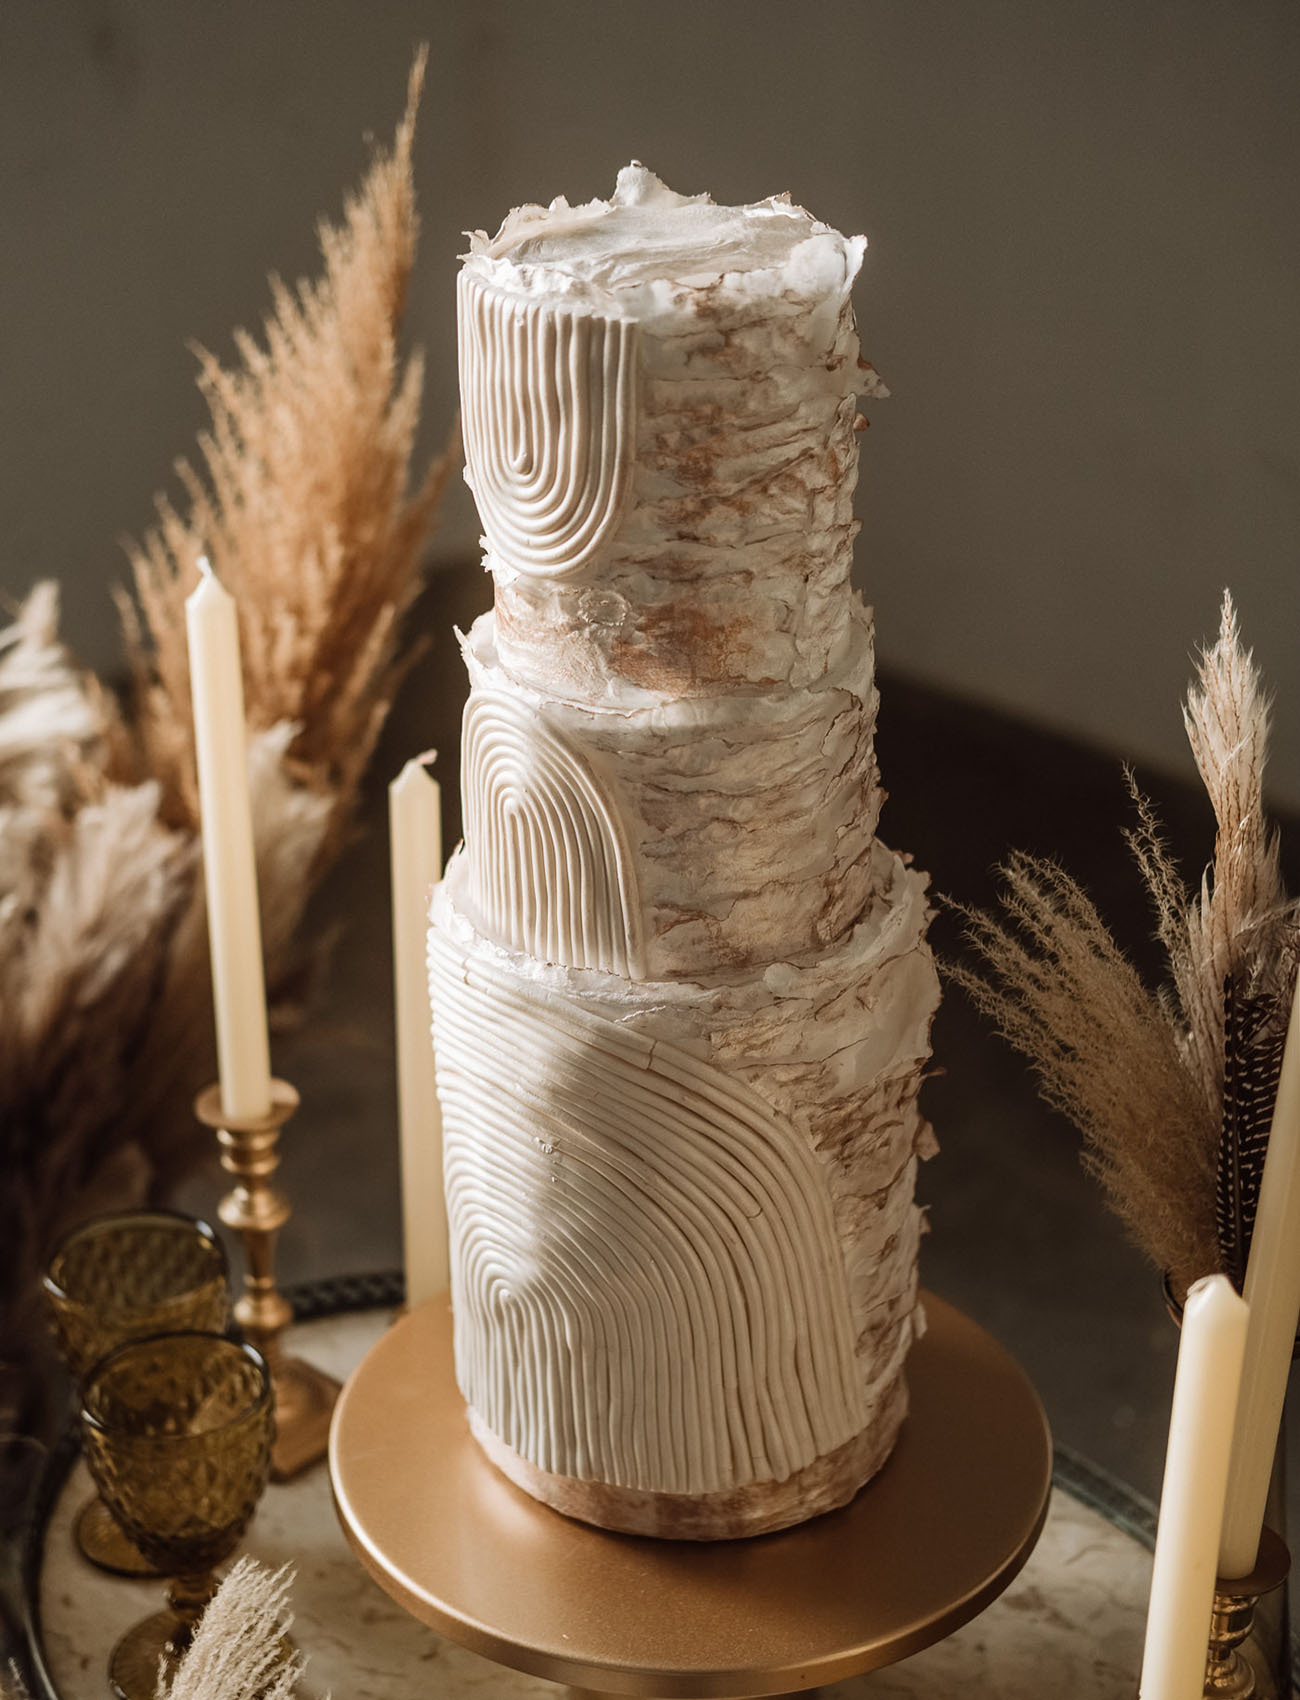 The wedding cake was a unique white textural one on a gold stand